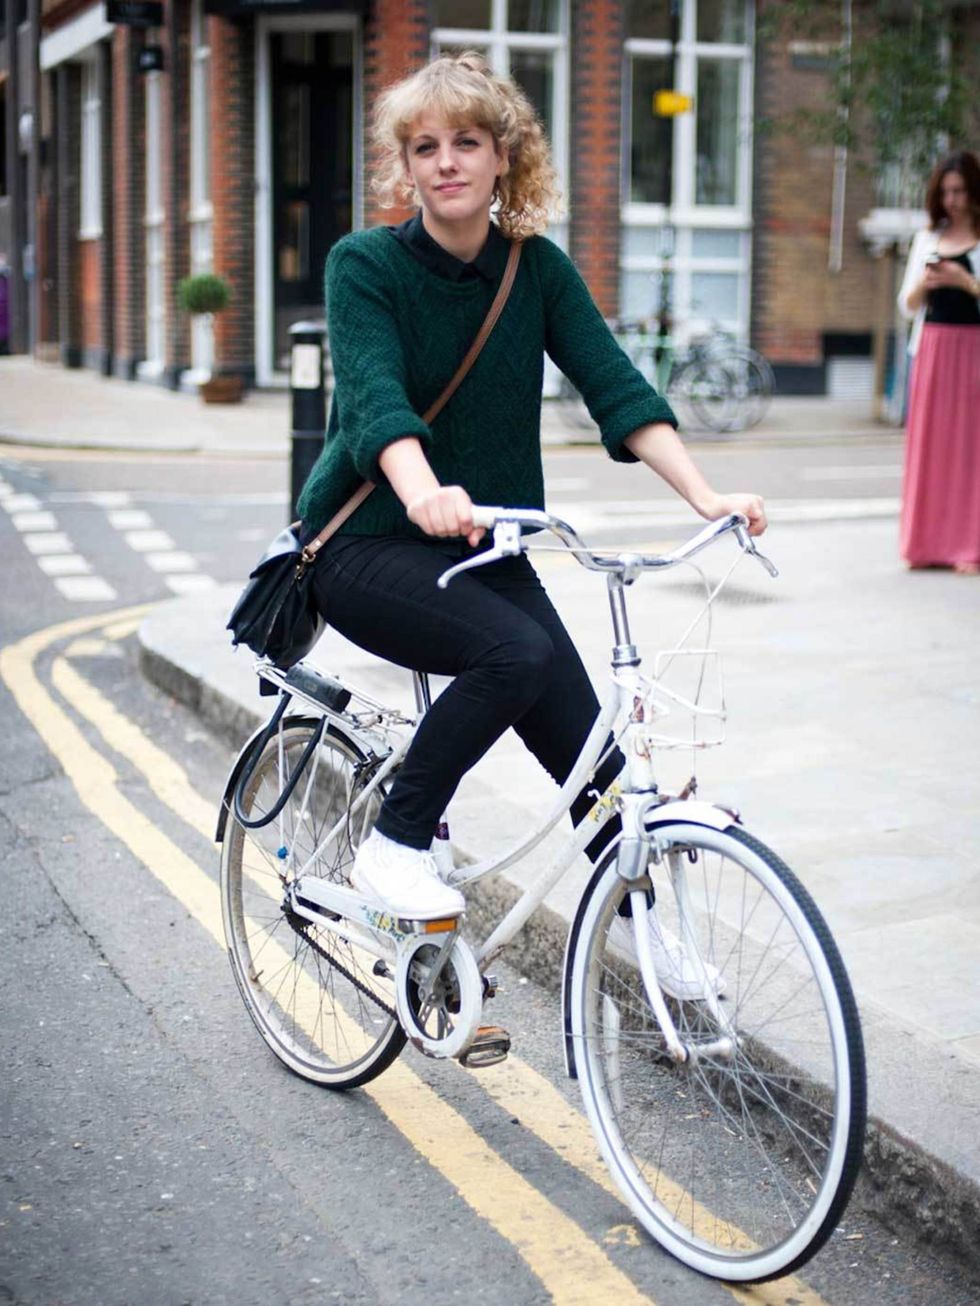 <p>Maddie, 23. Topshop jumper and bag, American Apparel shirt, M&amp;S jeans, Topshop shoes.</p><p>Photo by Stephanie Sian Smith</p>